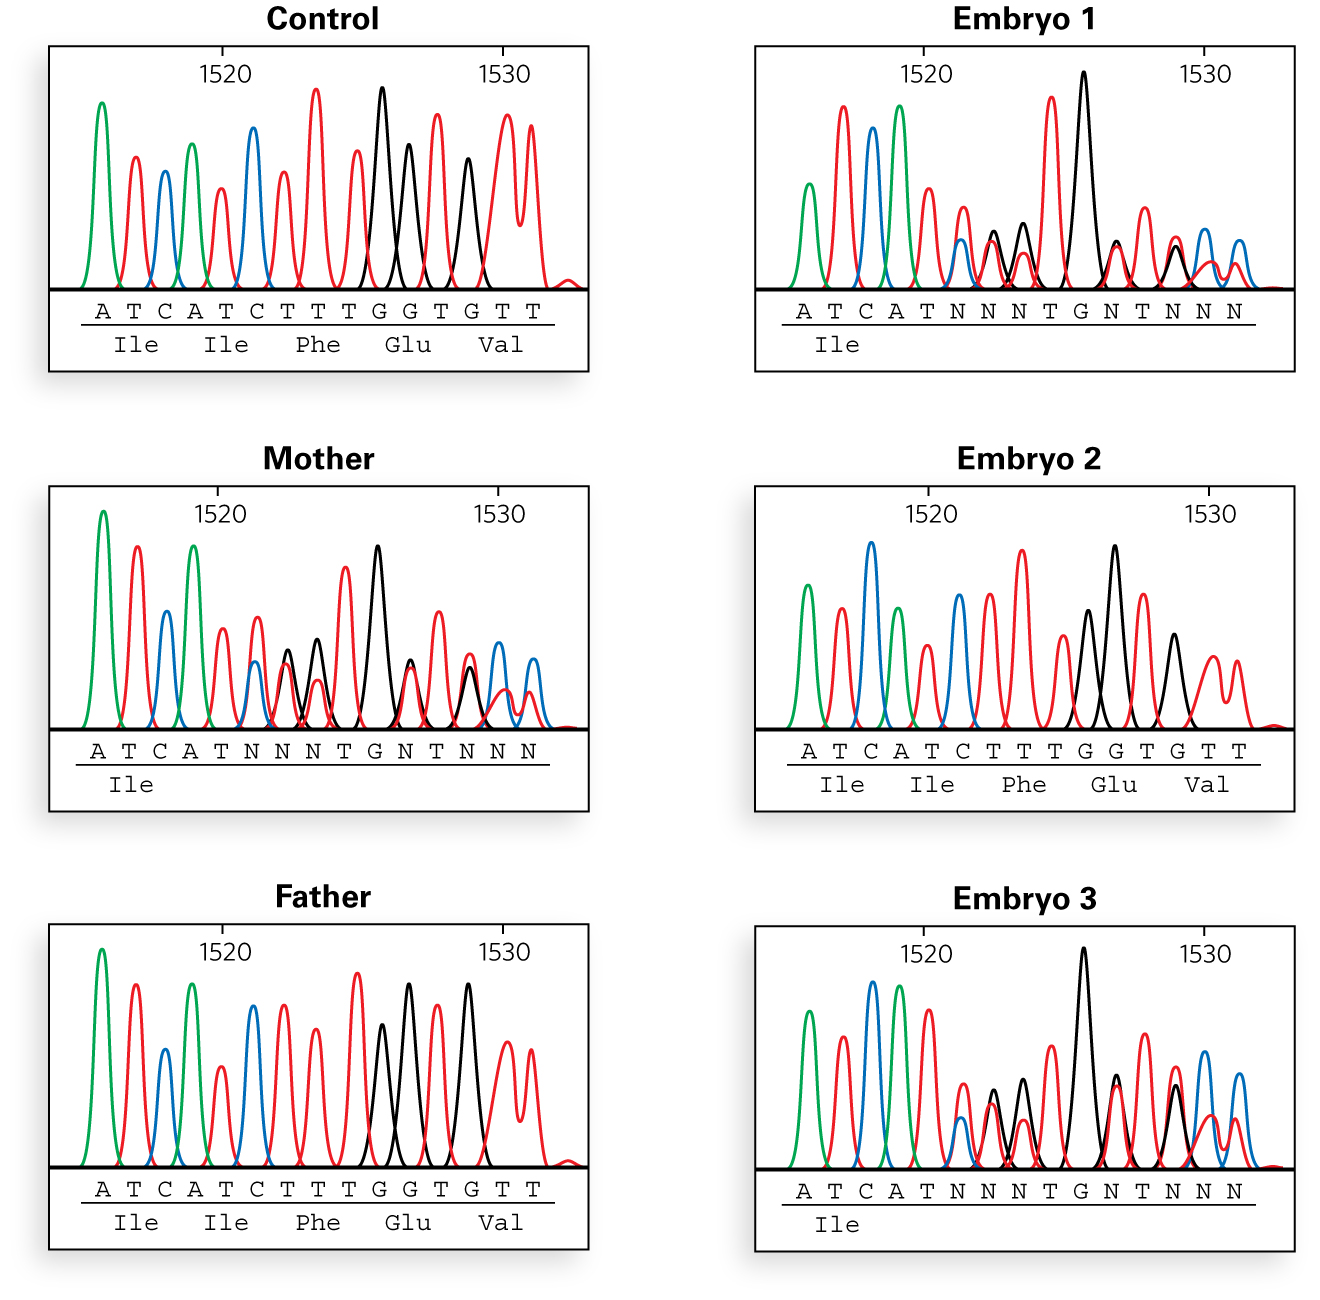 Sequencing chromatograms show the following results: Control sample: All tall, single peaks, ATCATCTTTGGTGTT, encoding amino acids Ile Ile Phe Glu Val Mother sample: Five tall, single peaks, followed by three shorter, overlapping peaks, then two tall single peaks, and five more shorter overlapping peaks, ATCATNNNTGNTNNN, encoding amino acid Ile and four unreadable amino acids Father sample: All tall, single peaks, ATCATCTTTGGTGTT, encoding amino acids Ile Ile Phe Glu Val Embryo 1 sample: Five tall, single peaks, followed by three shorter, overlapping peaks, then two tall single peaks, and five more shorter overlapping peaks, ATCATNNNTGNTNNN, encoding amino acid Ile and four unreadable amino acids Embryo 2 sample: All tall, single peaks, ATCATCTTTGGTGTT, encoding amino acids Ile Ile Phe Glu Val Embryo 3 sample: Five tall, single peaks, followed by three shorter, overlapping peaks, then two tall single peaks, and five more shorter overlapping peaks, ATCATNNNTGNTNNN, encoding amino acid Ile and four unreadable amino acids